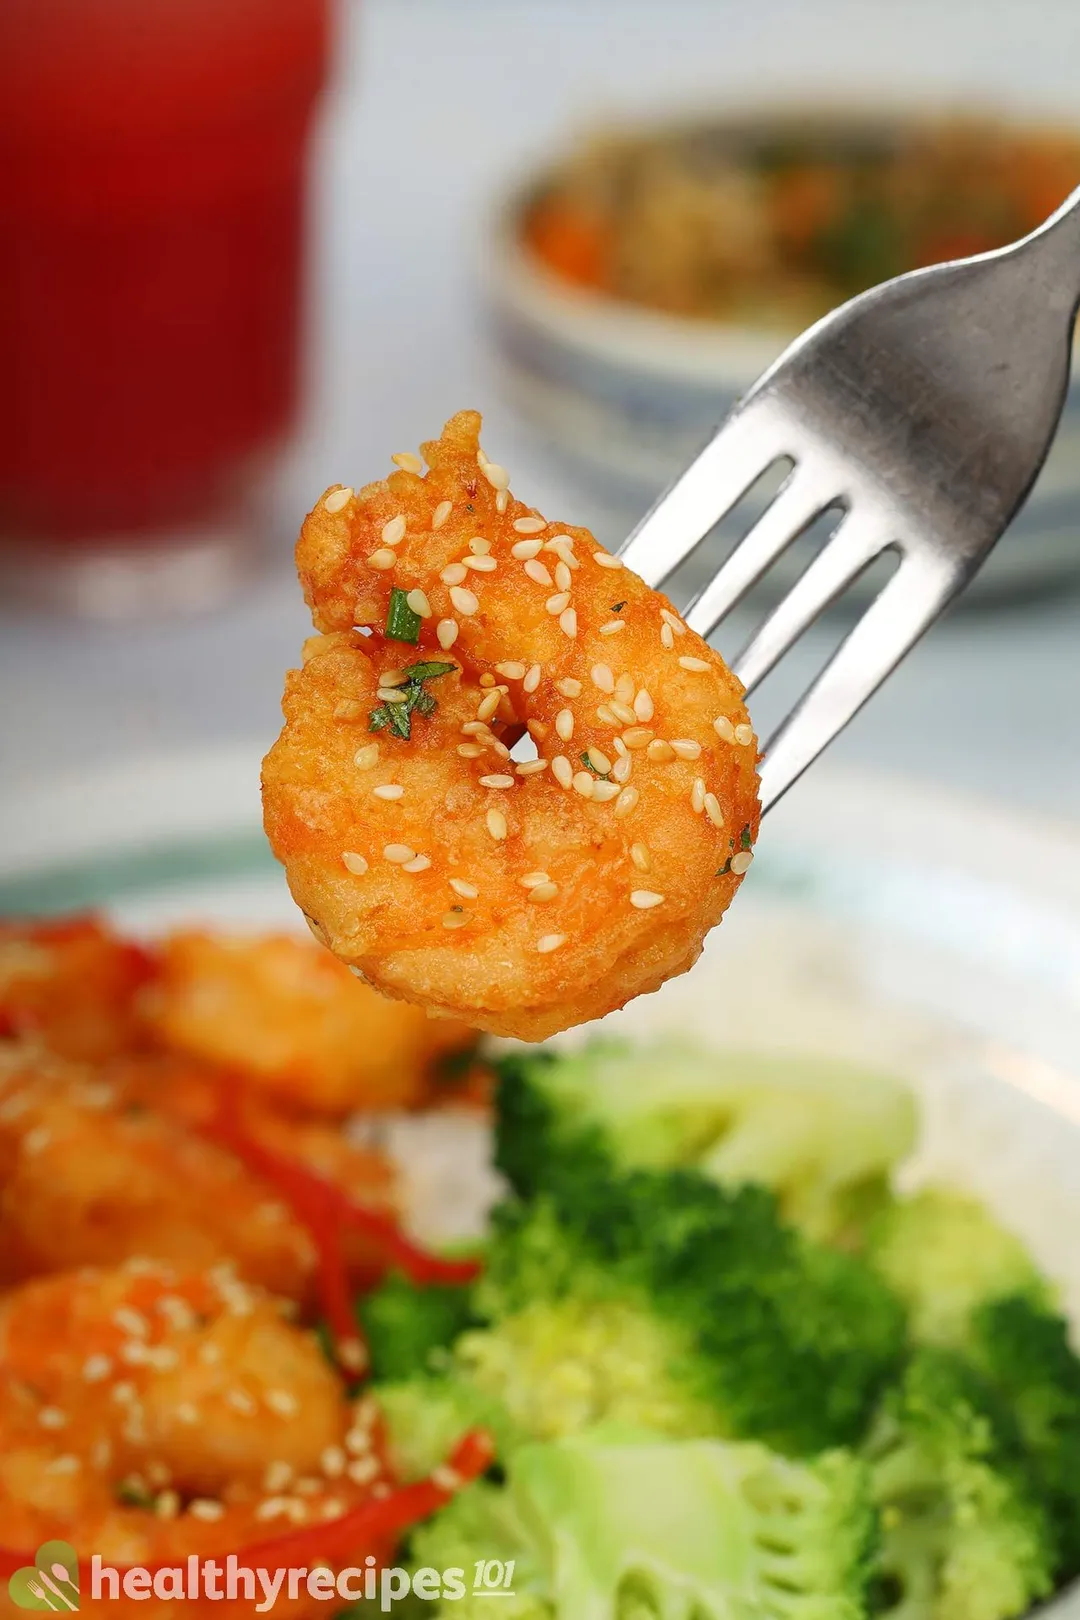 What to Serve With Firecracker Shrimp